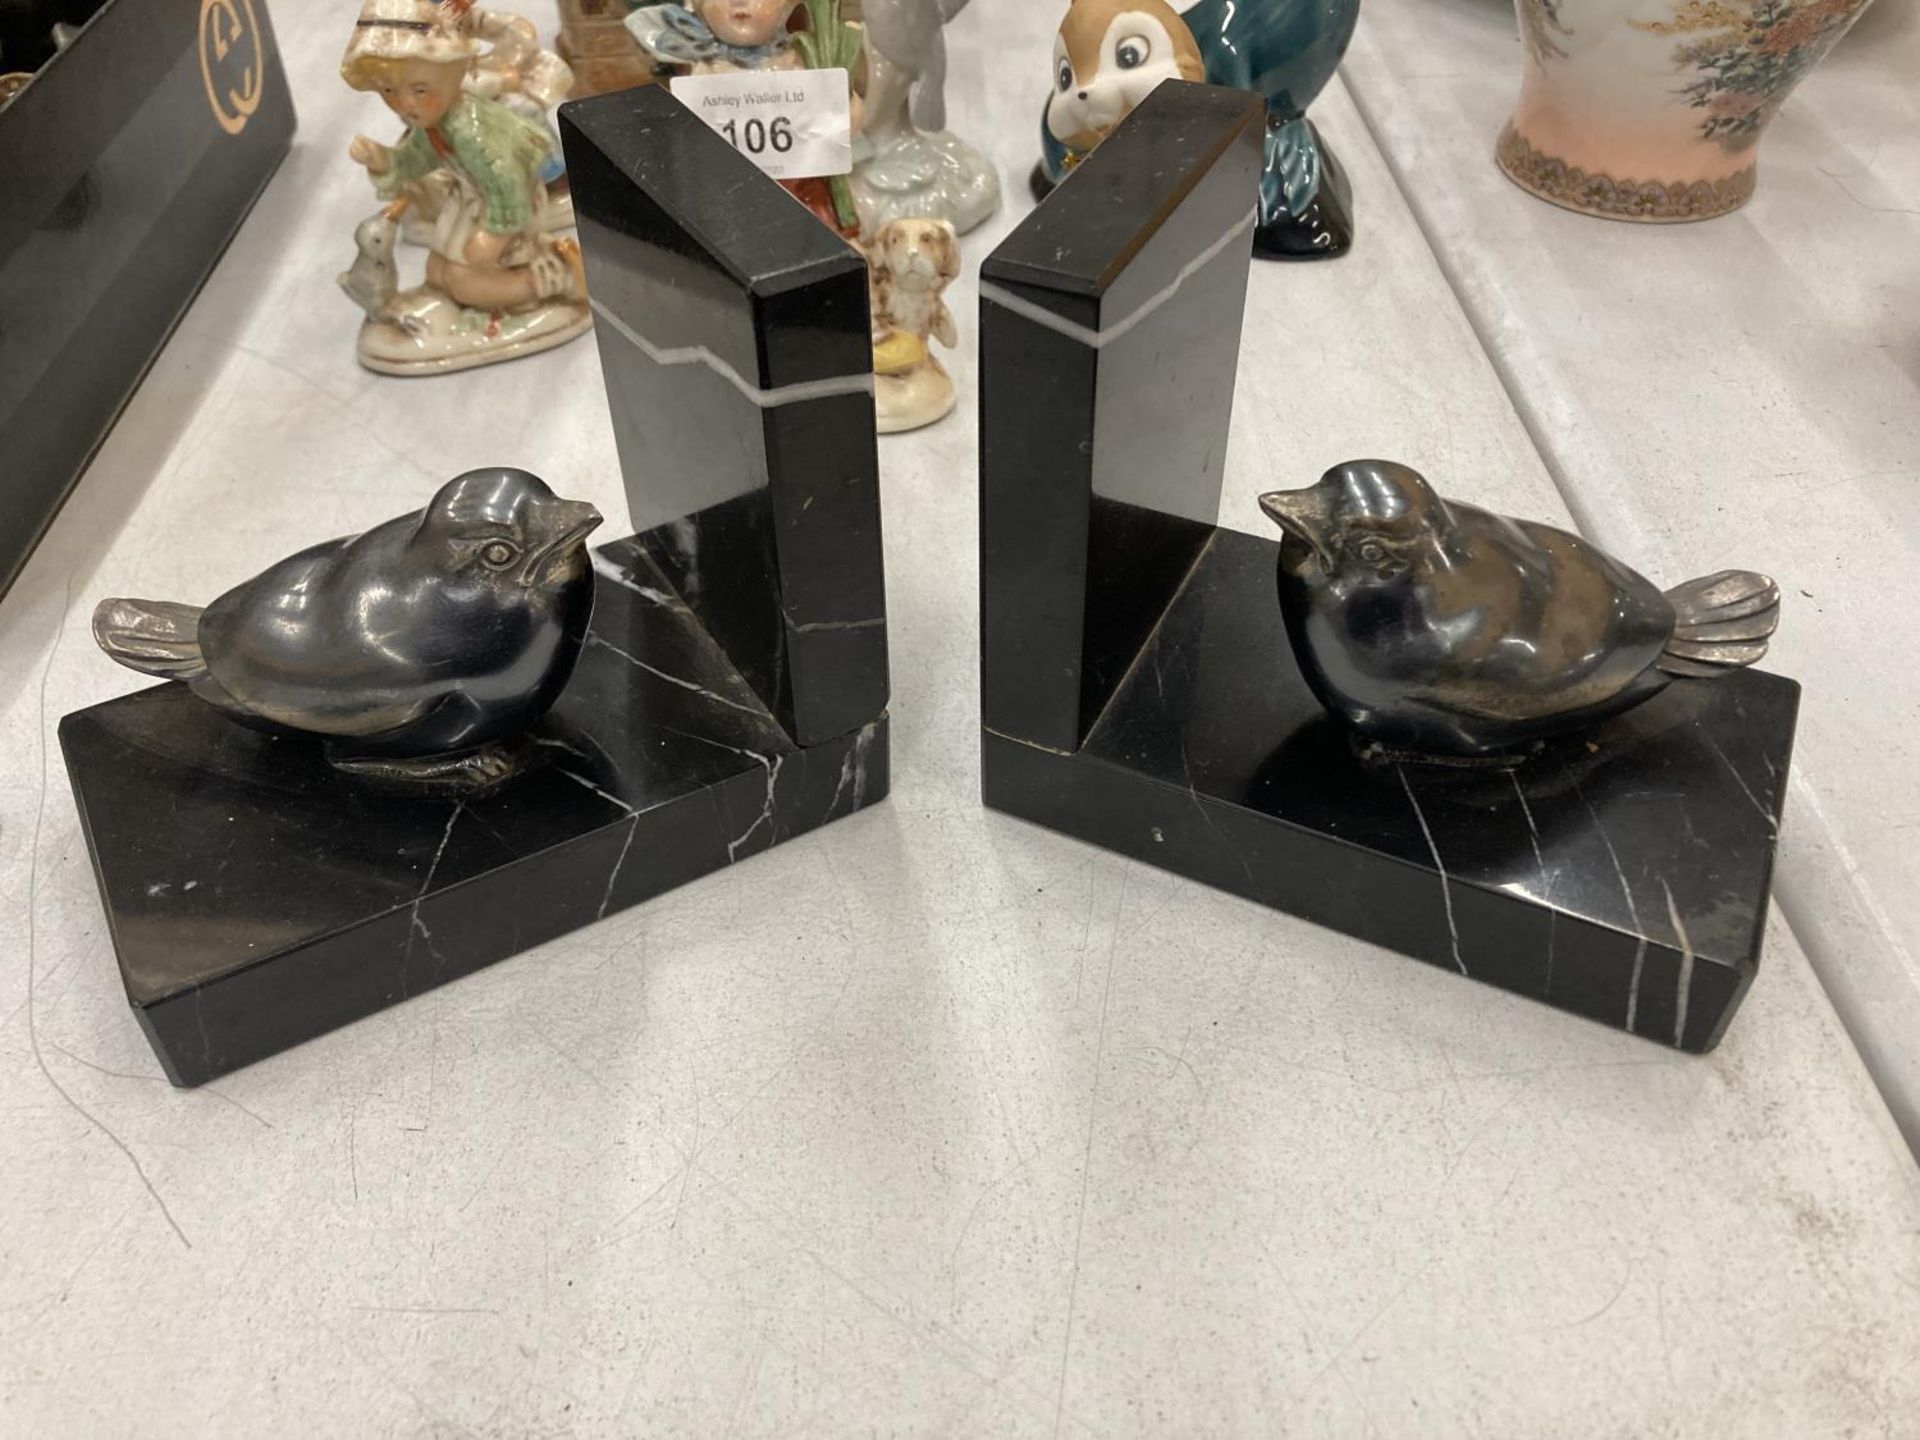 A PAIR OF ART DECO STYLE BOOK-ENDS, BIRDS ON A MARBLE BASE, HEIGHT 10CM